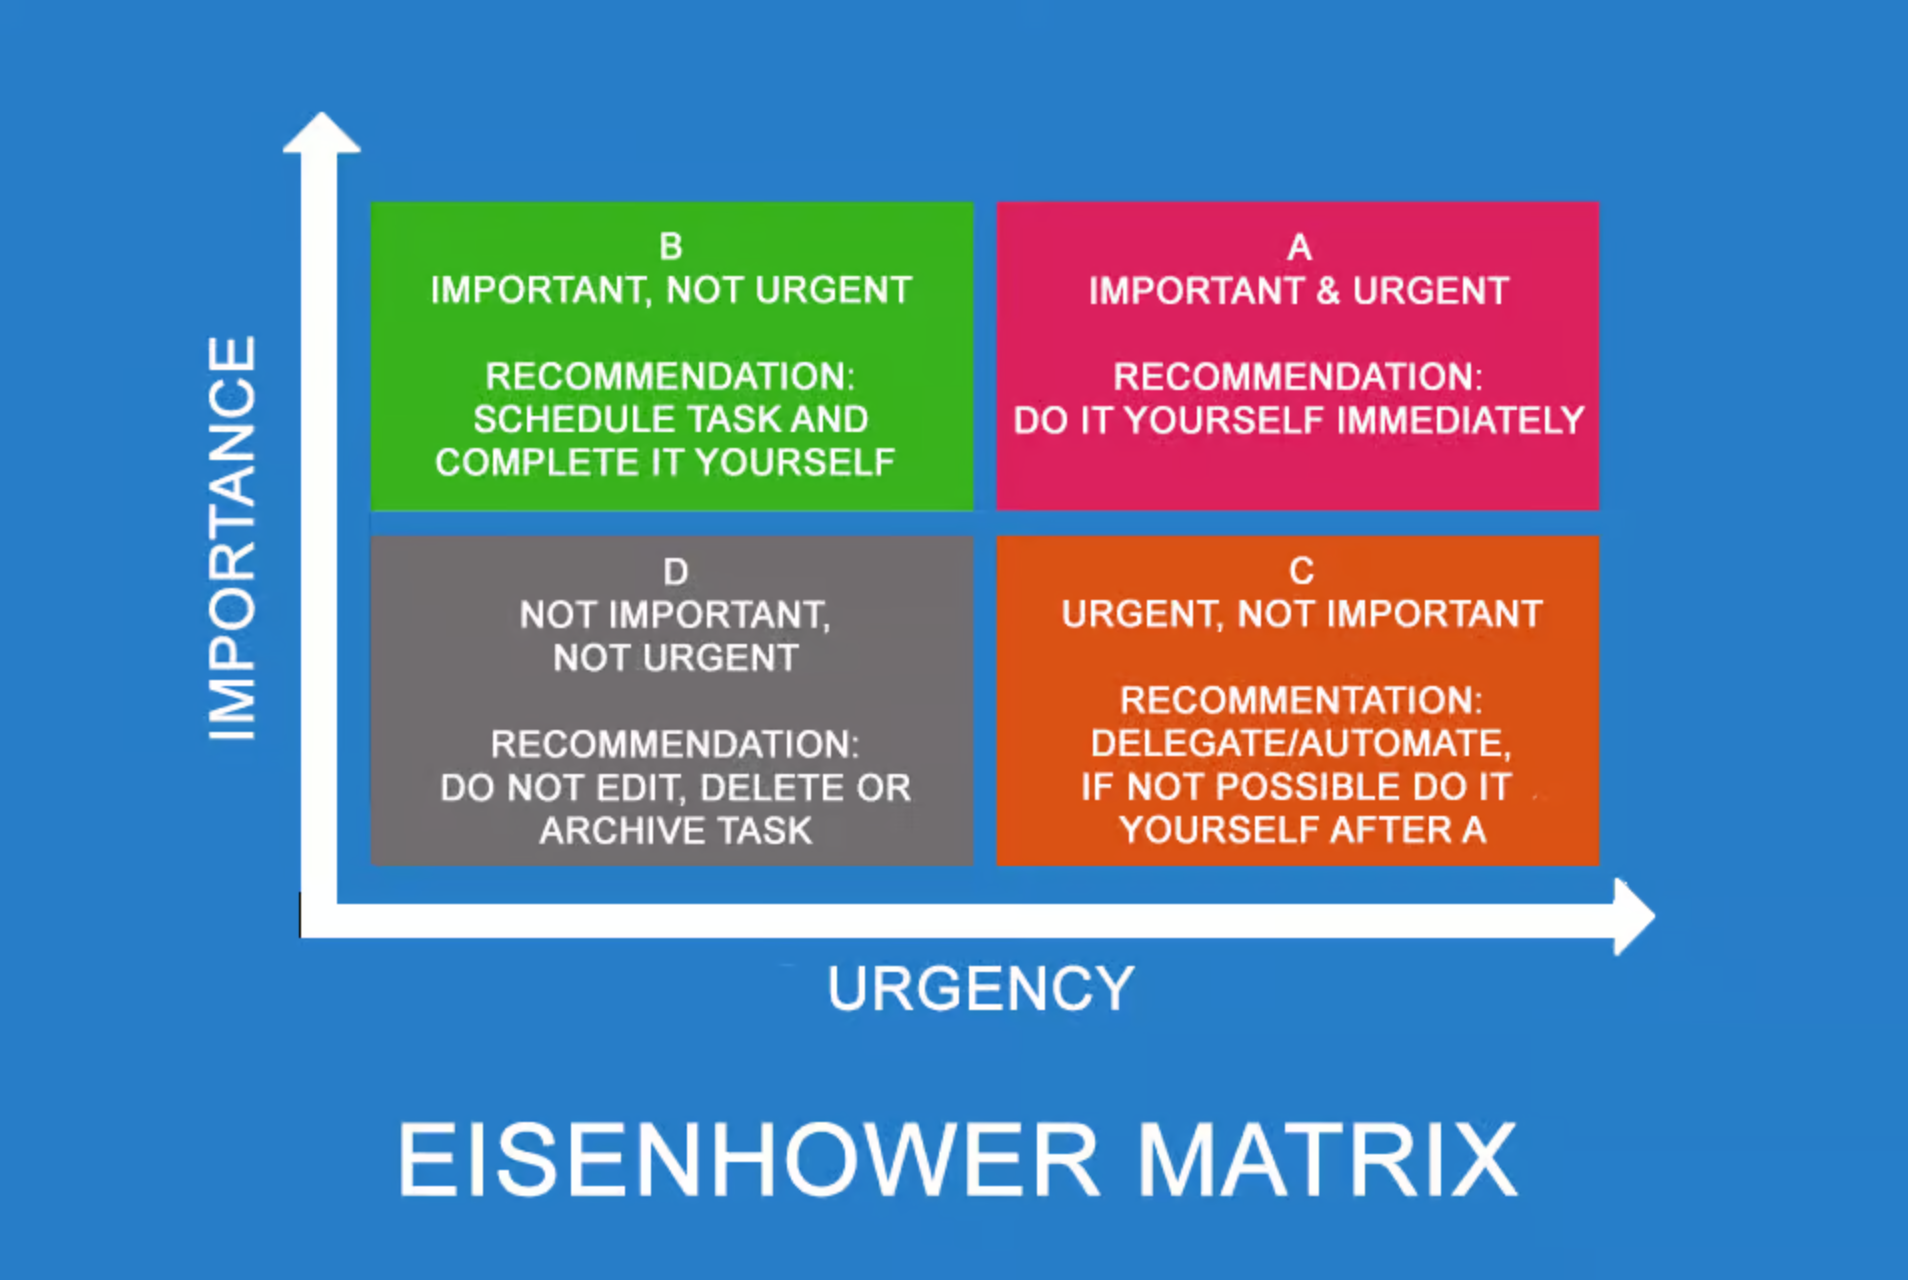 Eisenhower How to Prioritize Tasks Effectively When Everything Feels Important